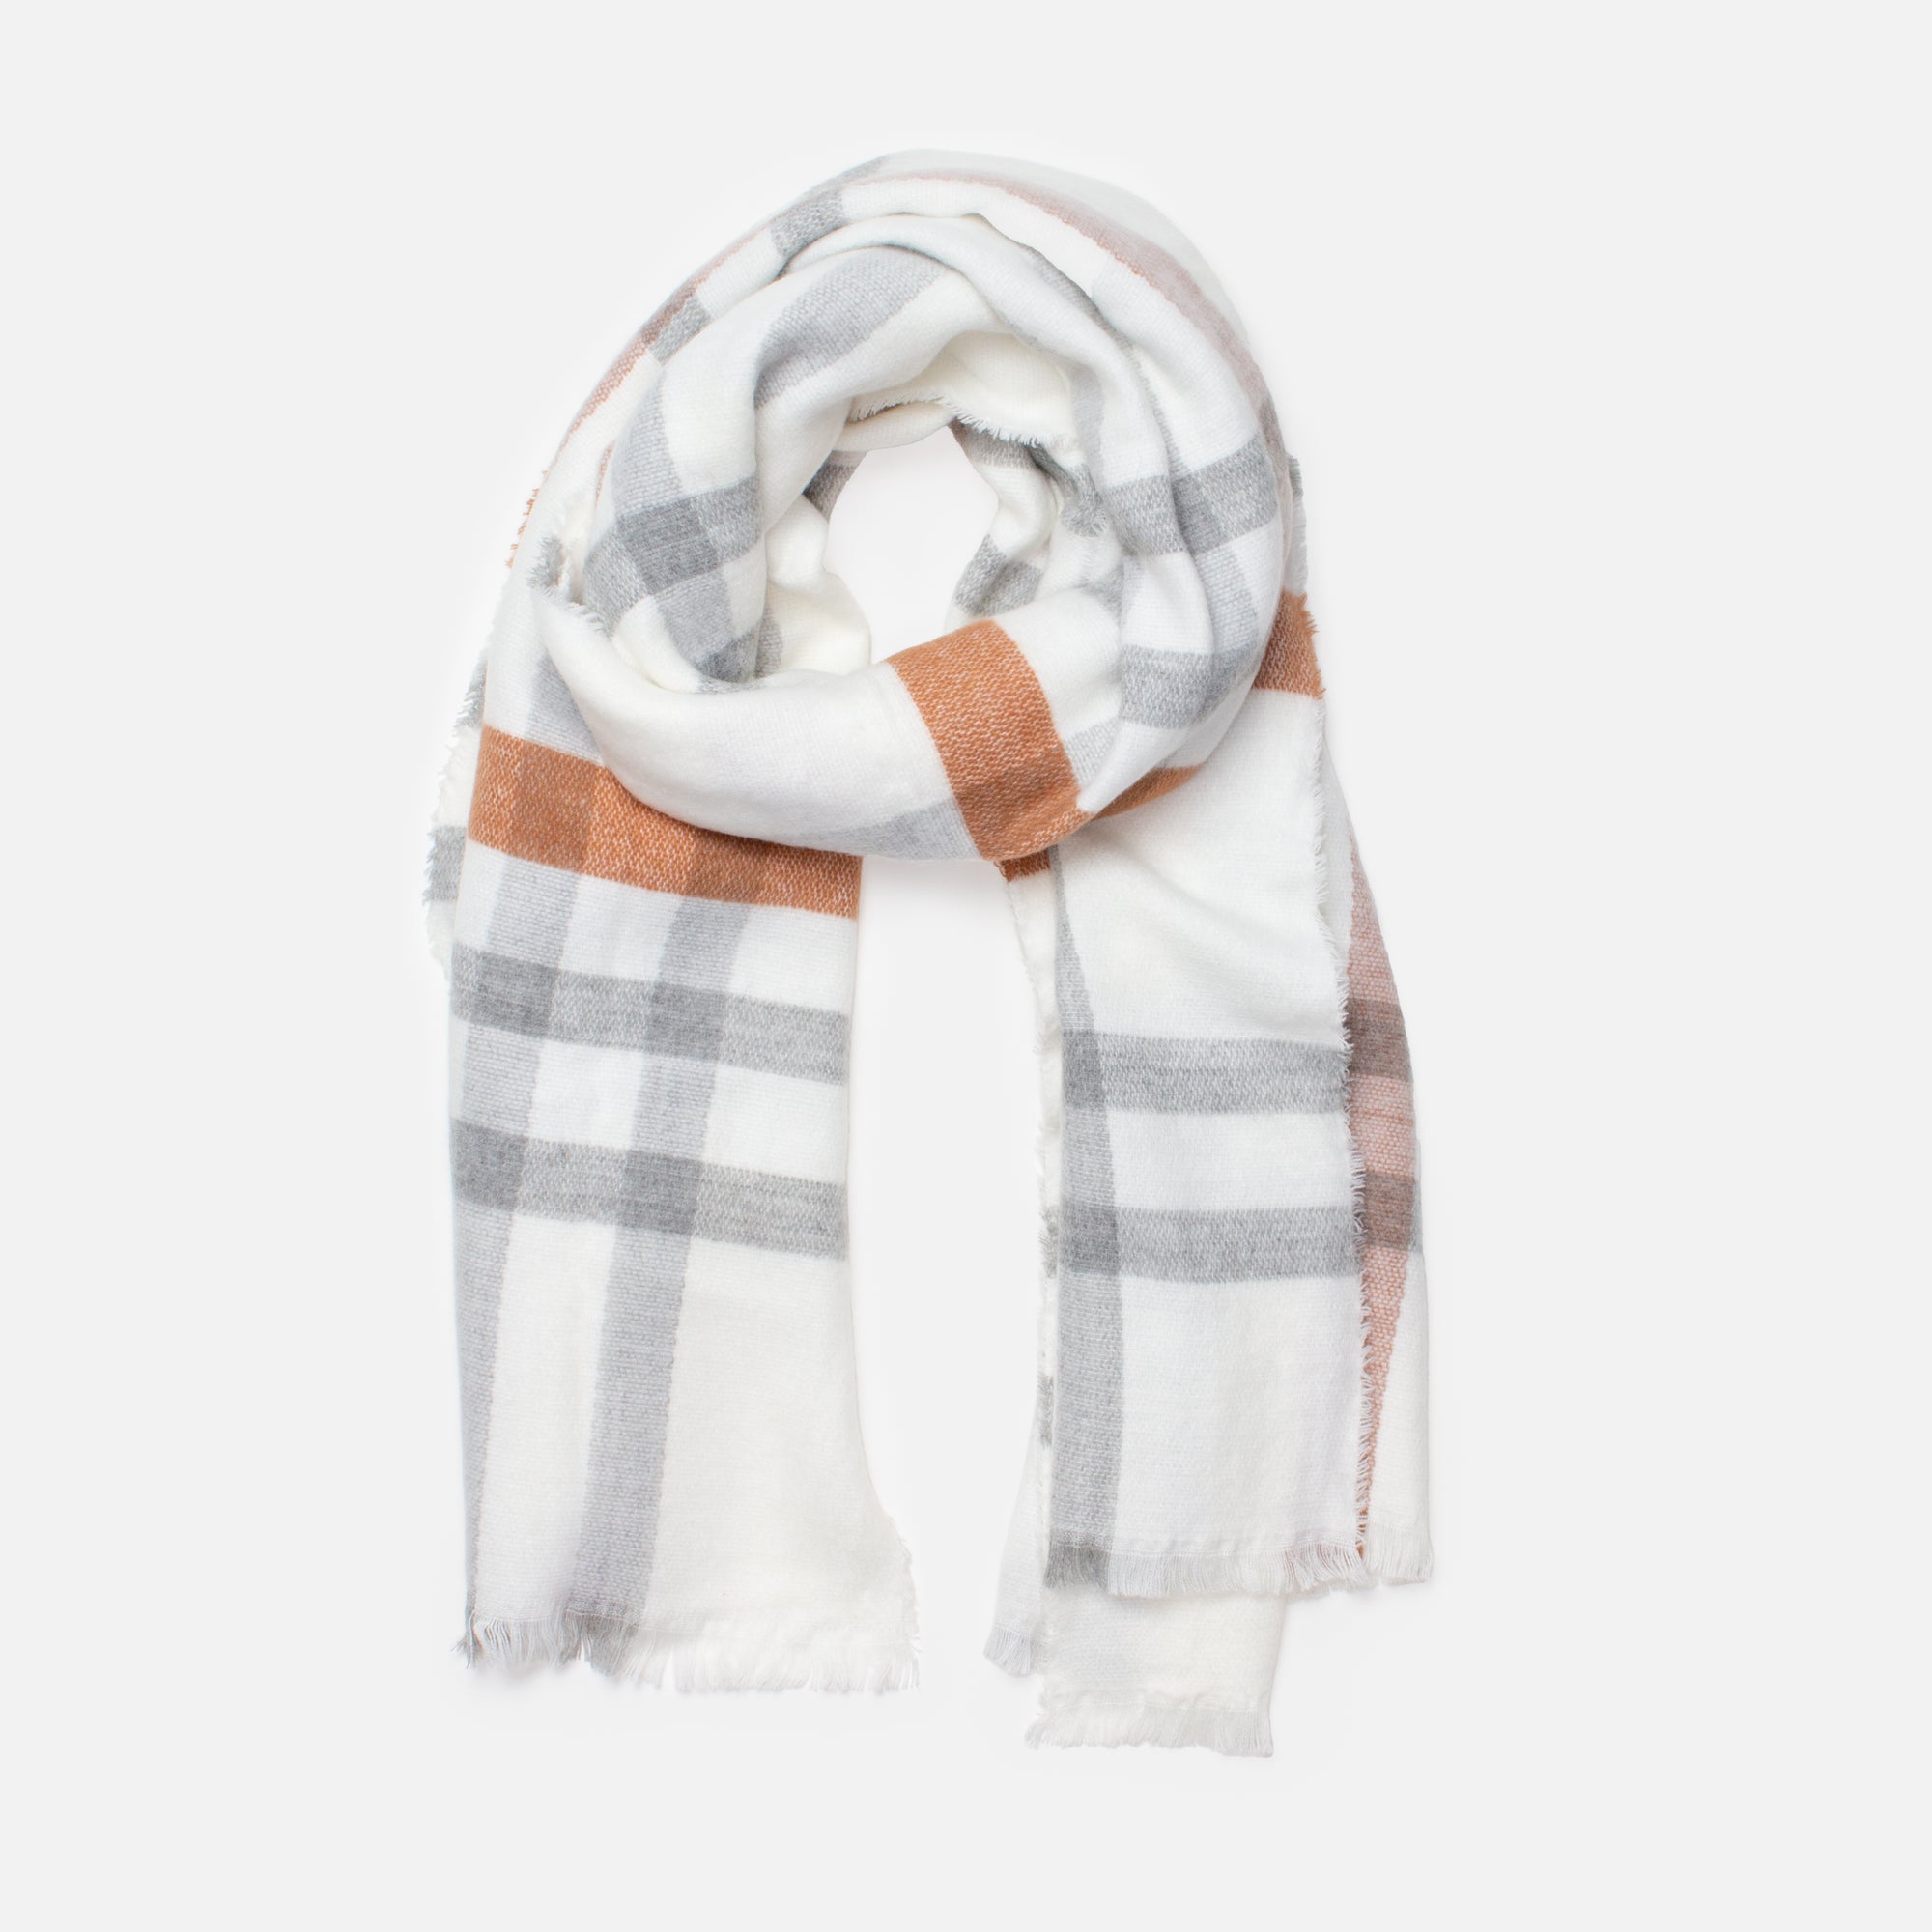 White scarf with gray and caramel checks